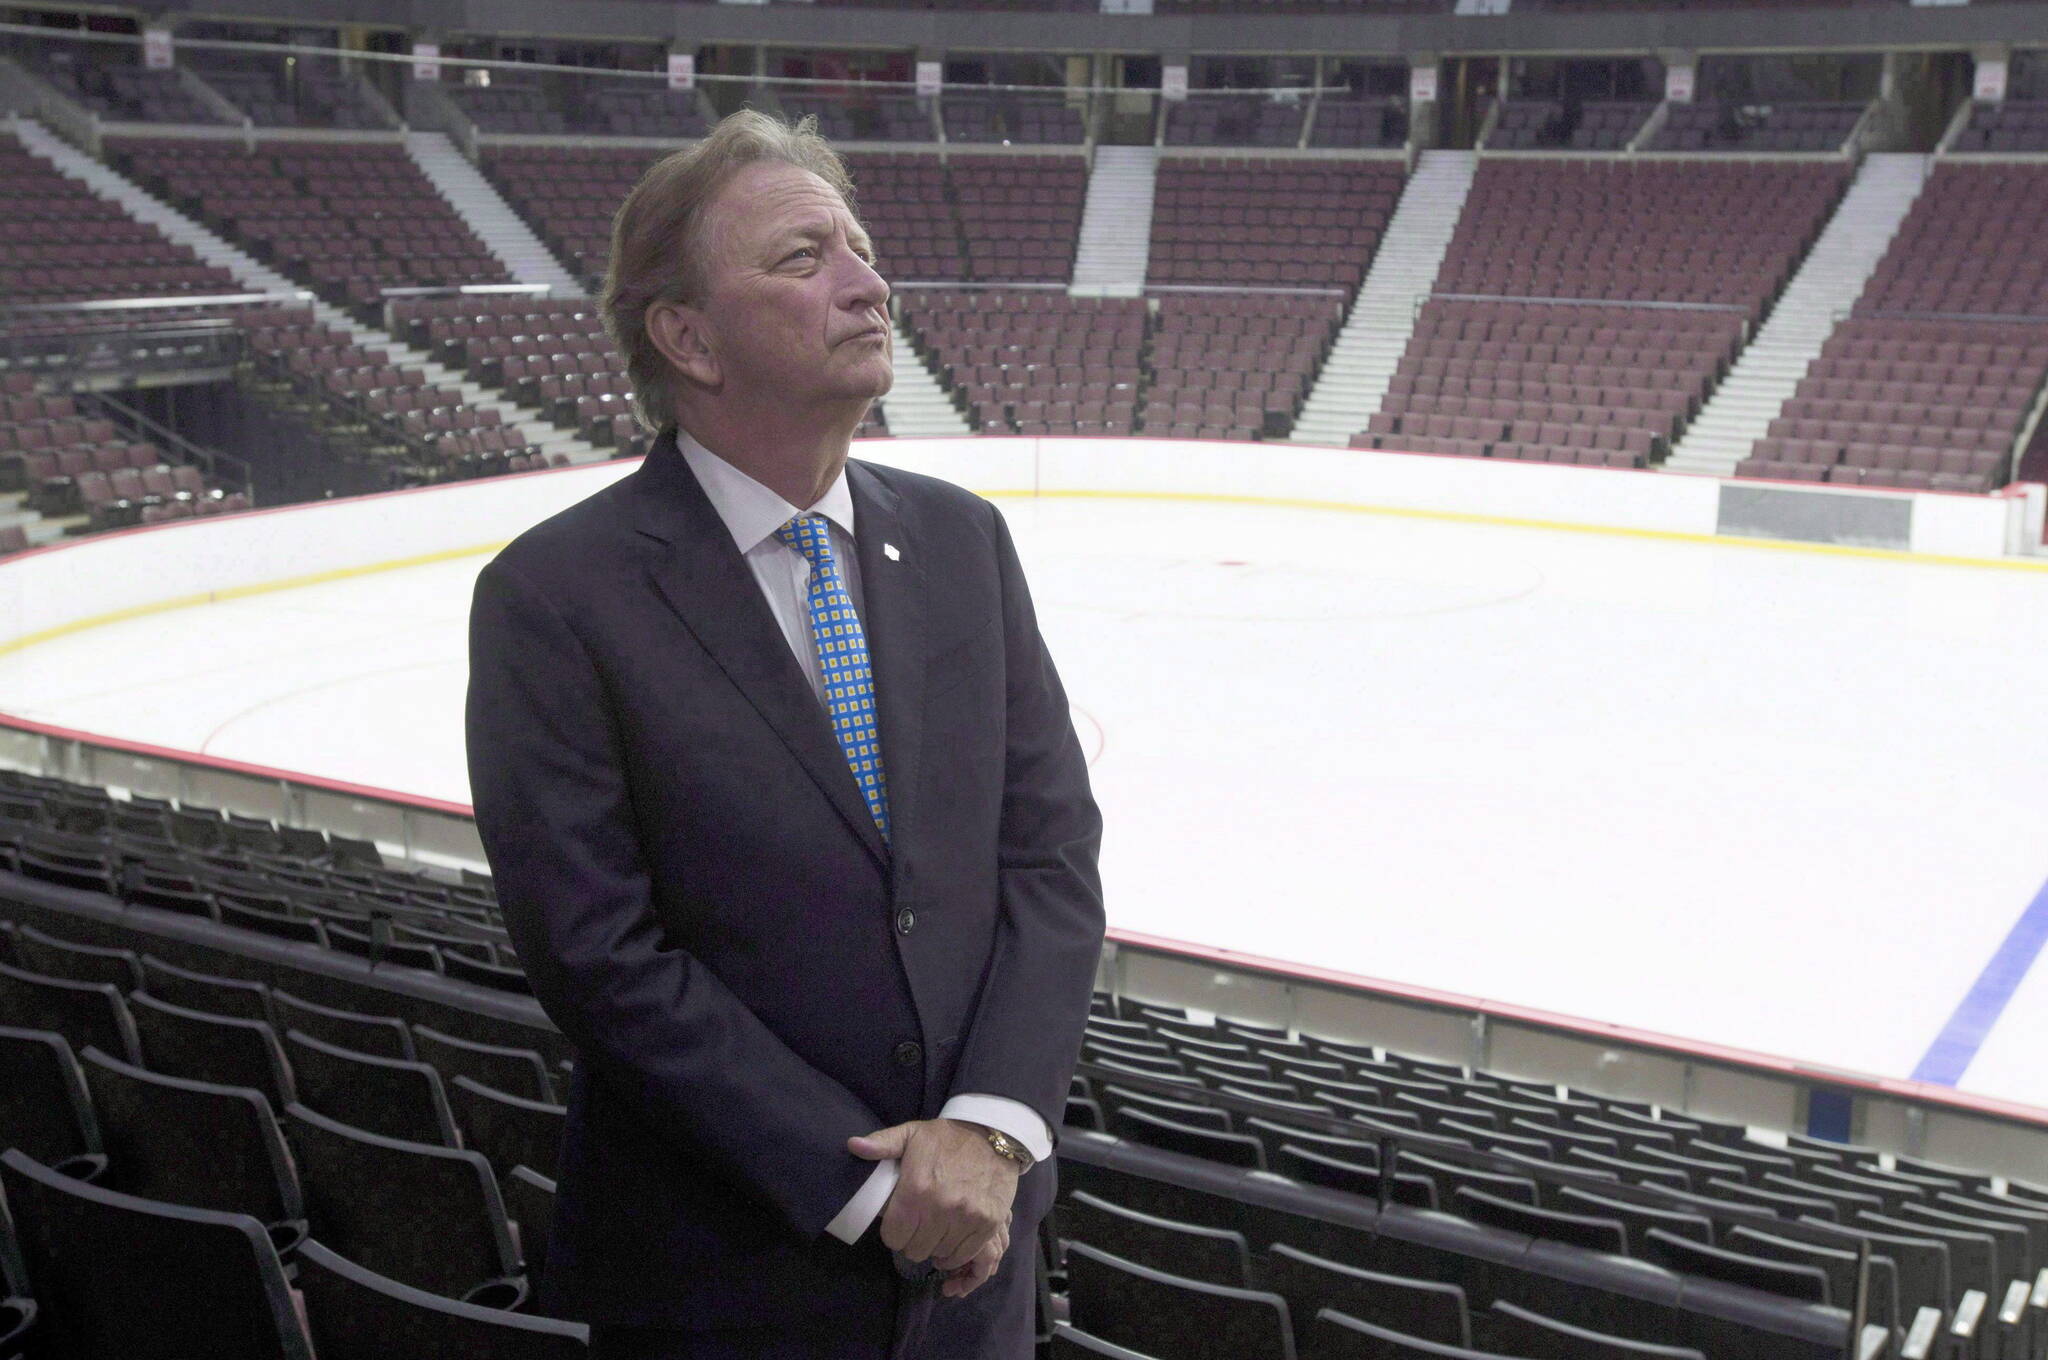 Ottawa Senators owner Eugene Melnyk stands near the ice as members of the media are given a tour of changes to the Canadian Tire Centre in Ottawa on September 7, 2017. Melnyk is suing his business partner for $700 million in a development deal that was meant to bring a new NHL arena to Ottawa’s downtown. THE CANADIAN PRESS/Adrian Wyld